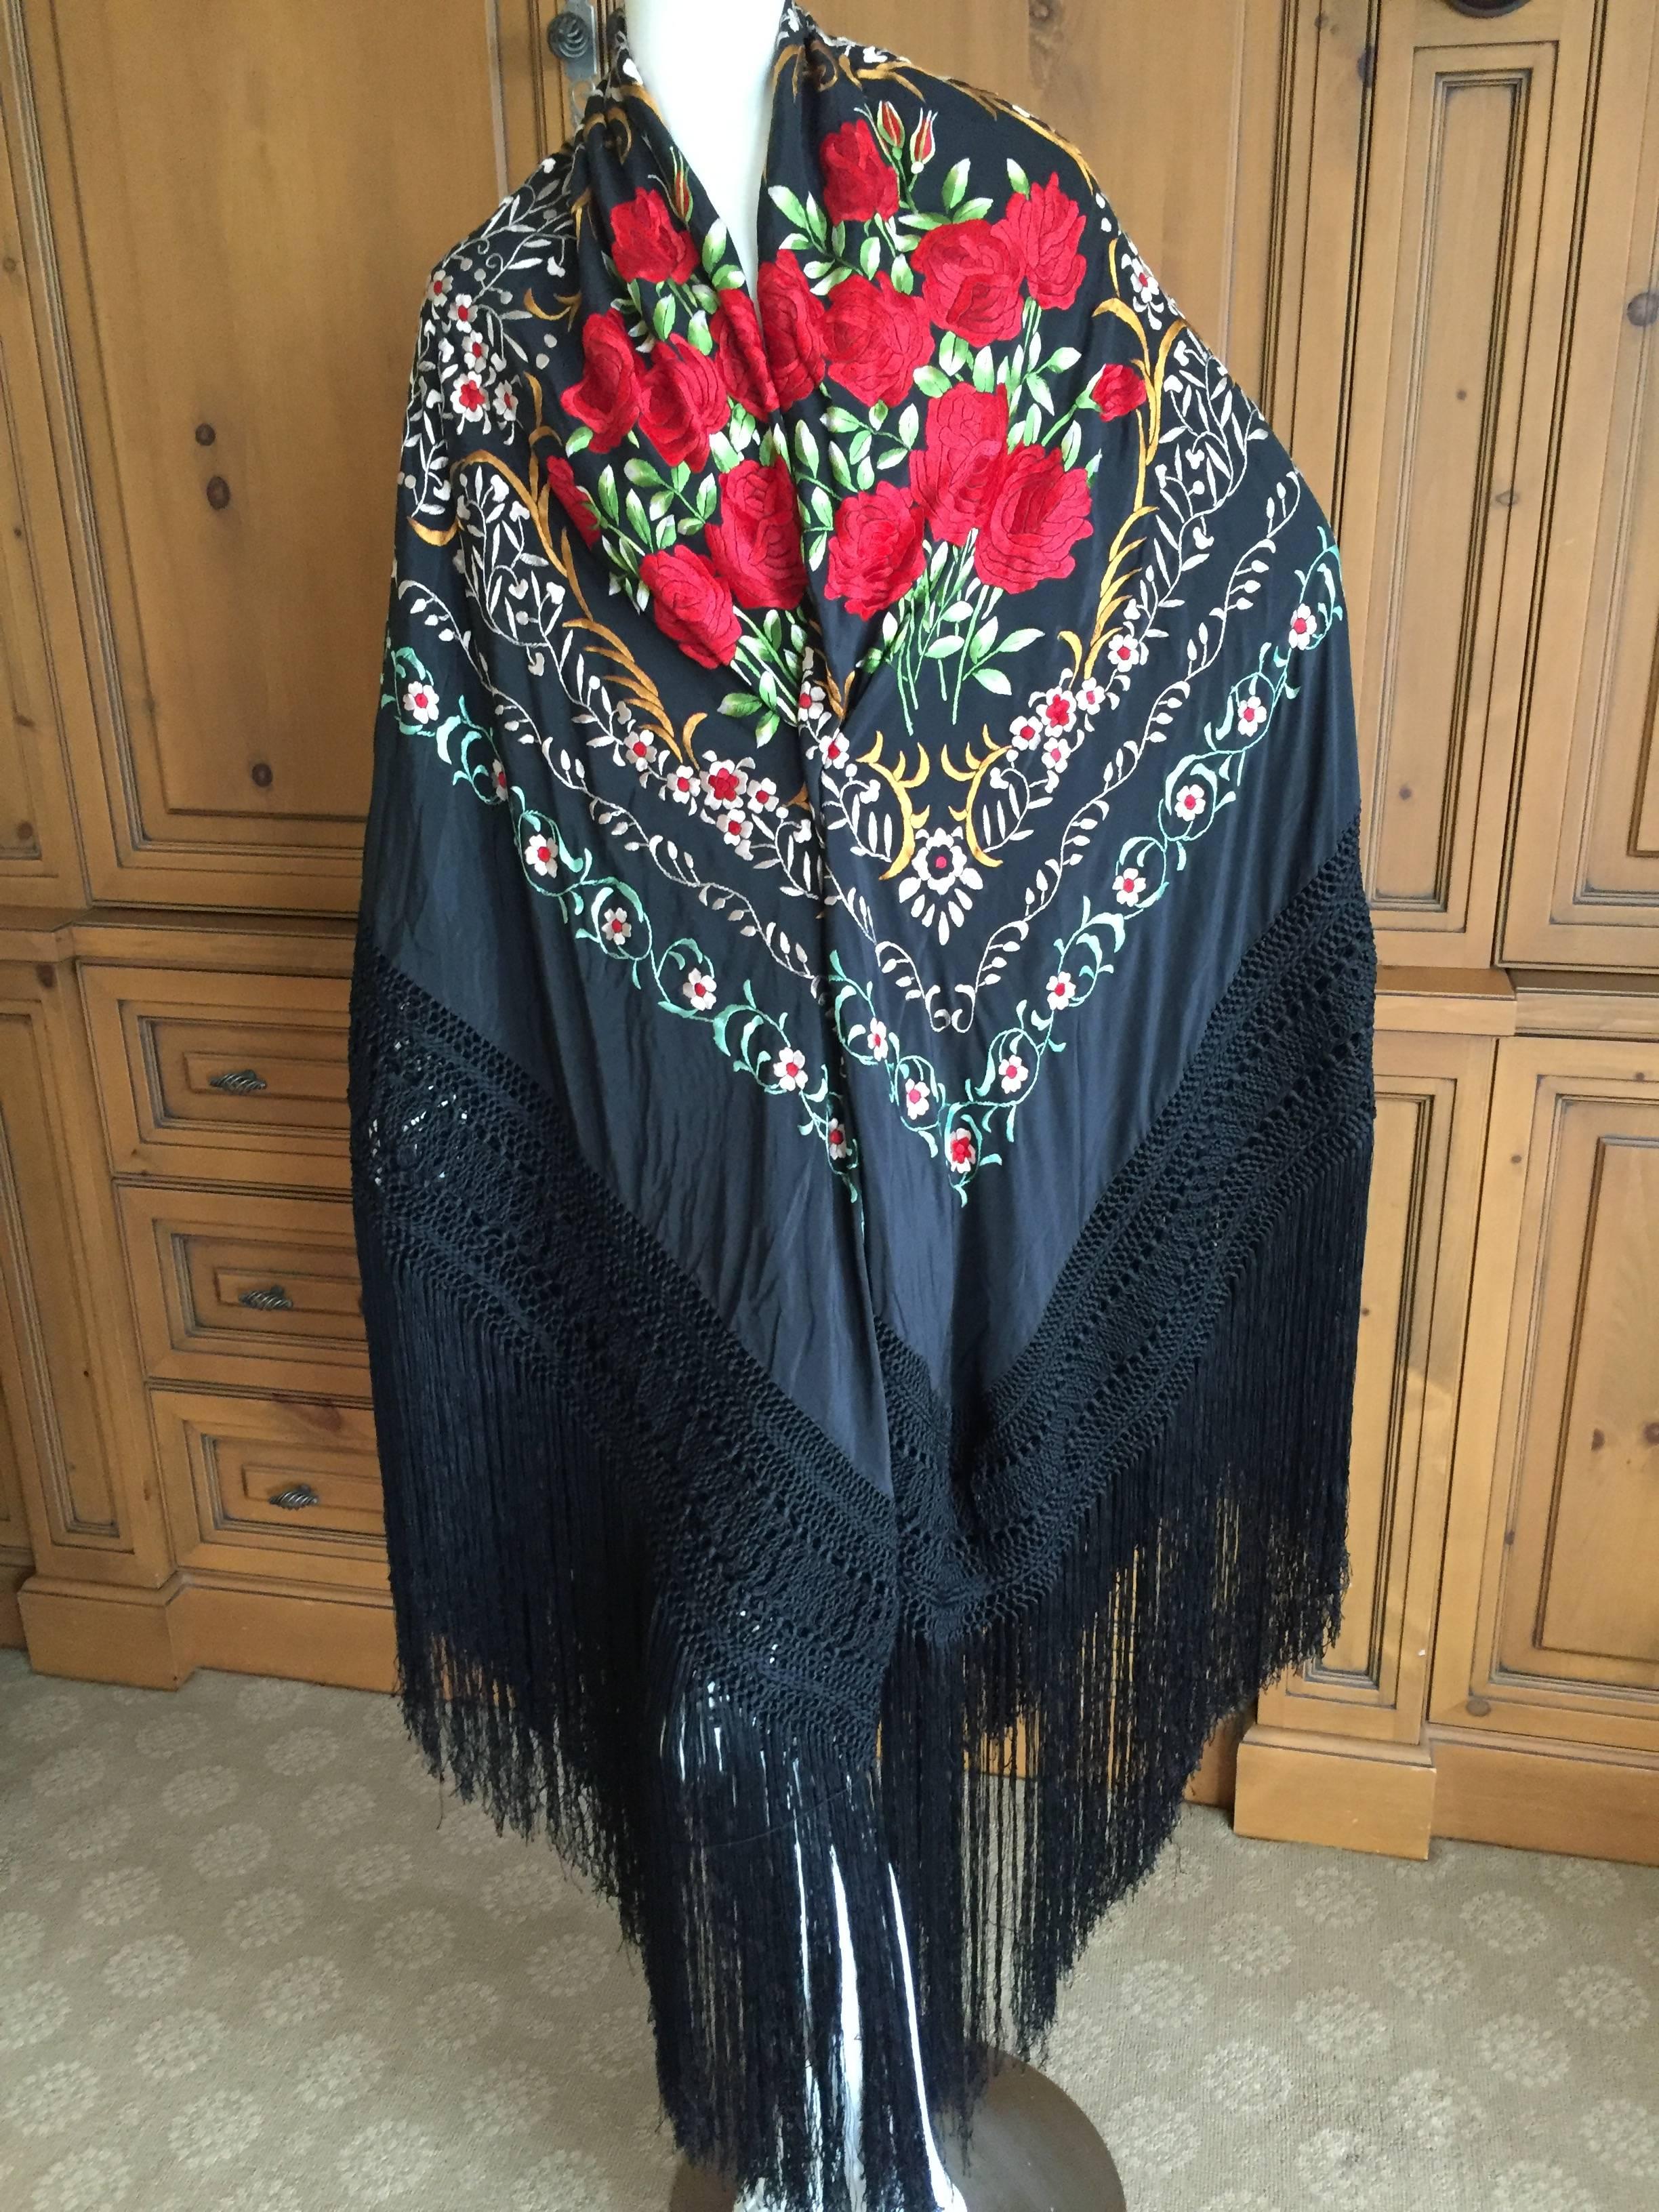 Women's or Men's Exquisite Embroidered Roses Antique Canton Fringe Piano Shawl For Sale